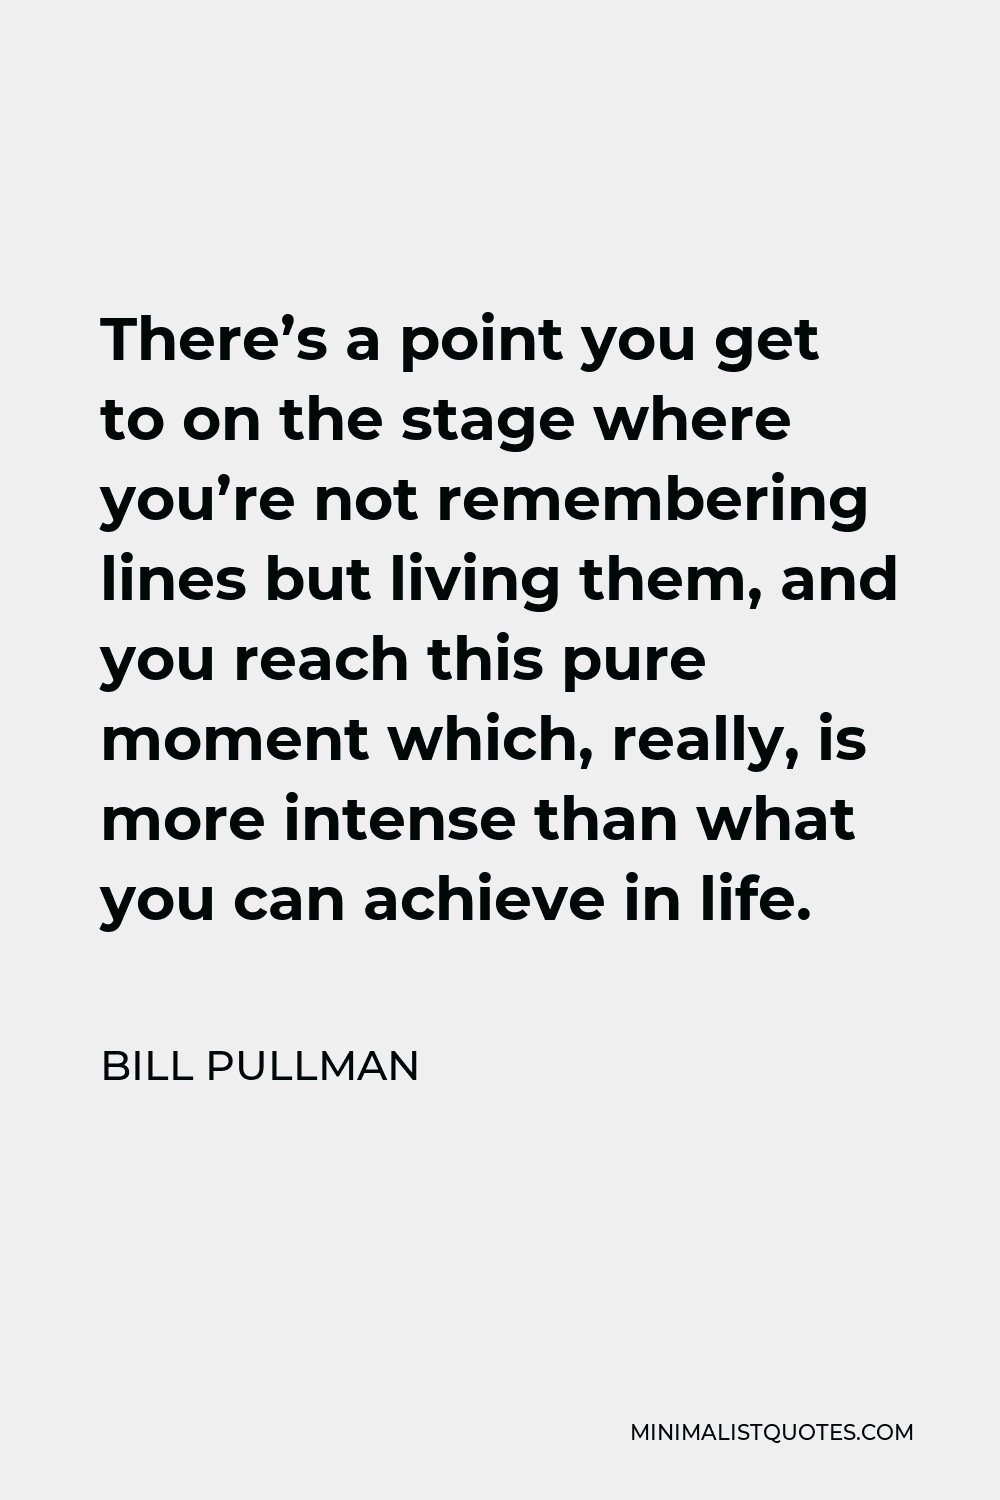 Bill Pullman Quote - There’s a point you get to on the stage where you’re not remembering lines but living them, and you reach this pure moment which, really, is more intense than what you can achieve in life.